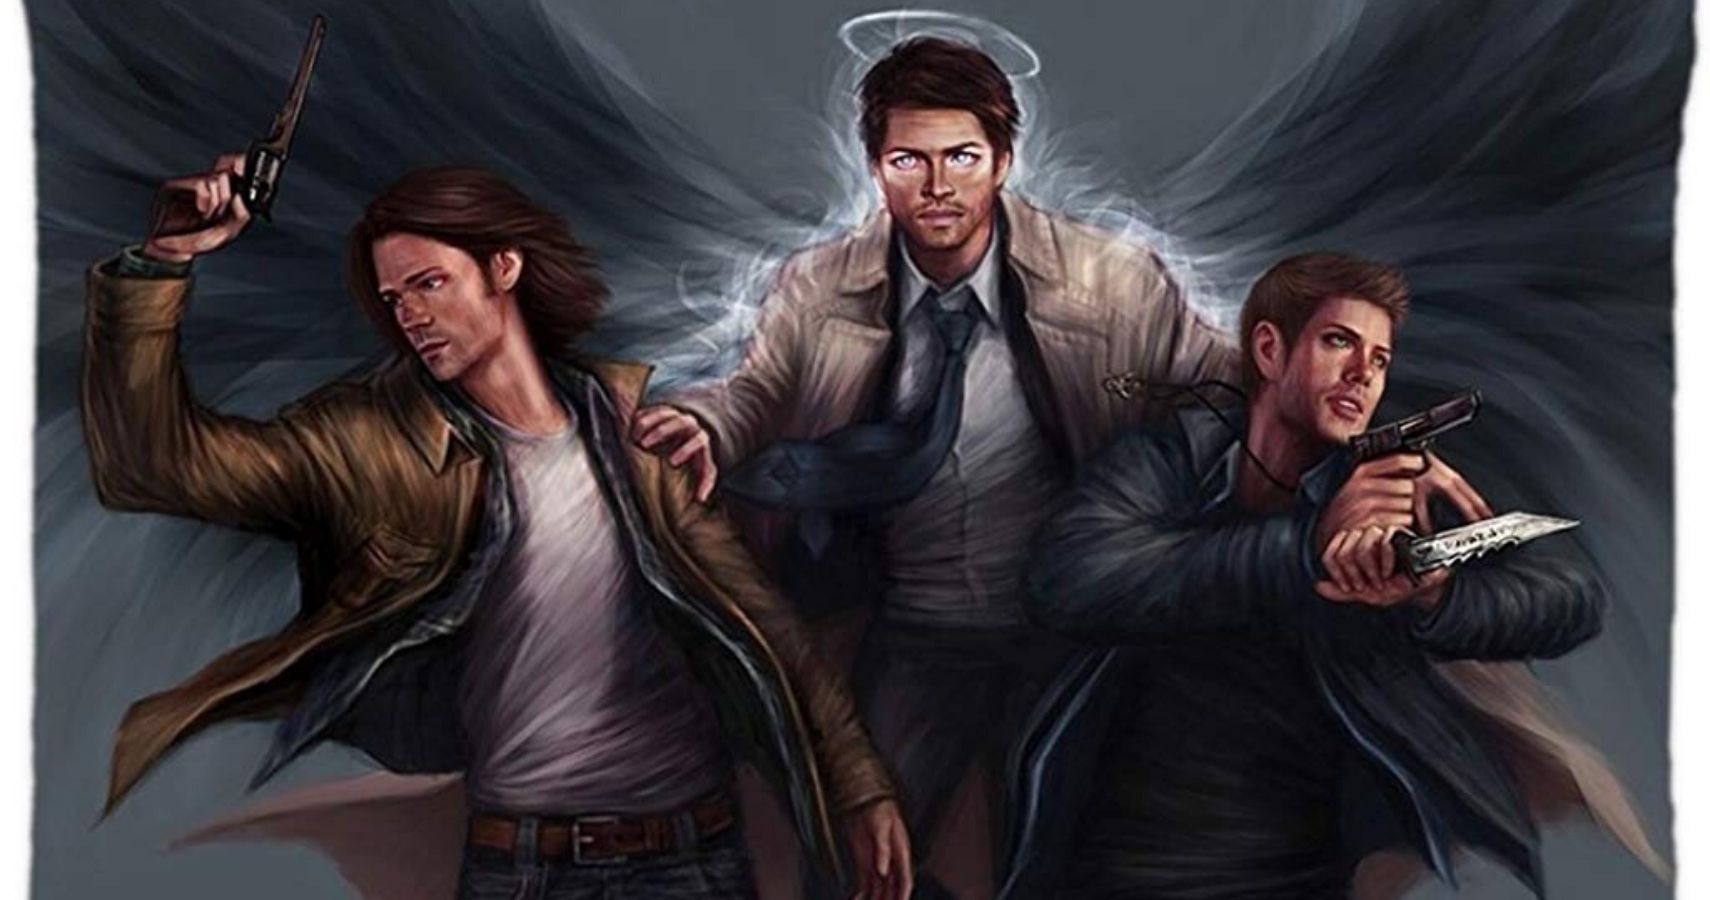 Art depicting Supernatural (2005-2020) characters Sam and Dean being watched over by Castiel. 